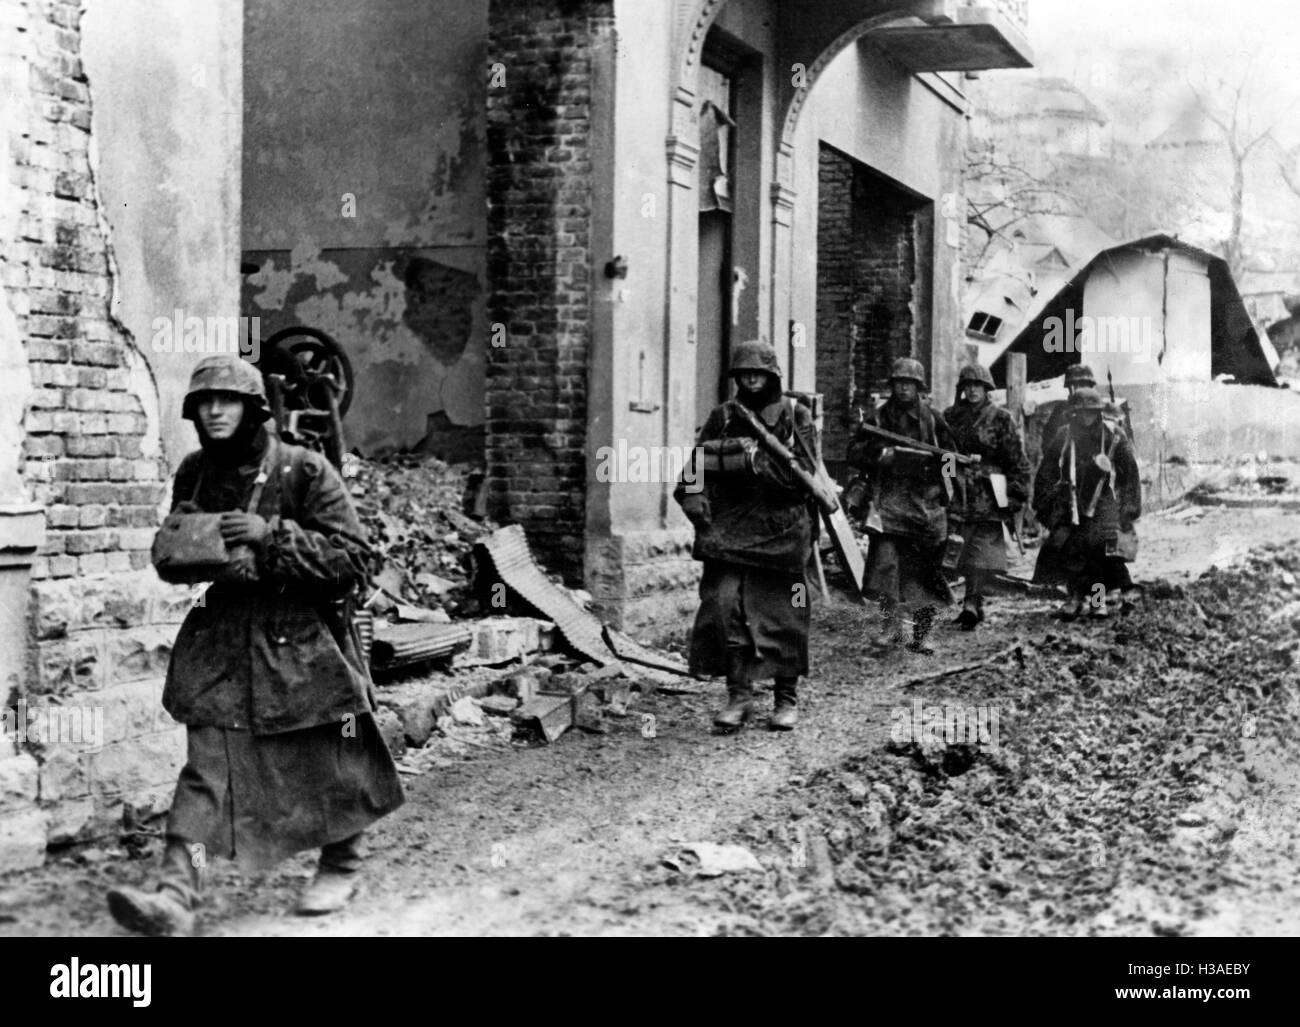 Waffen Ss March